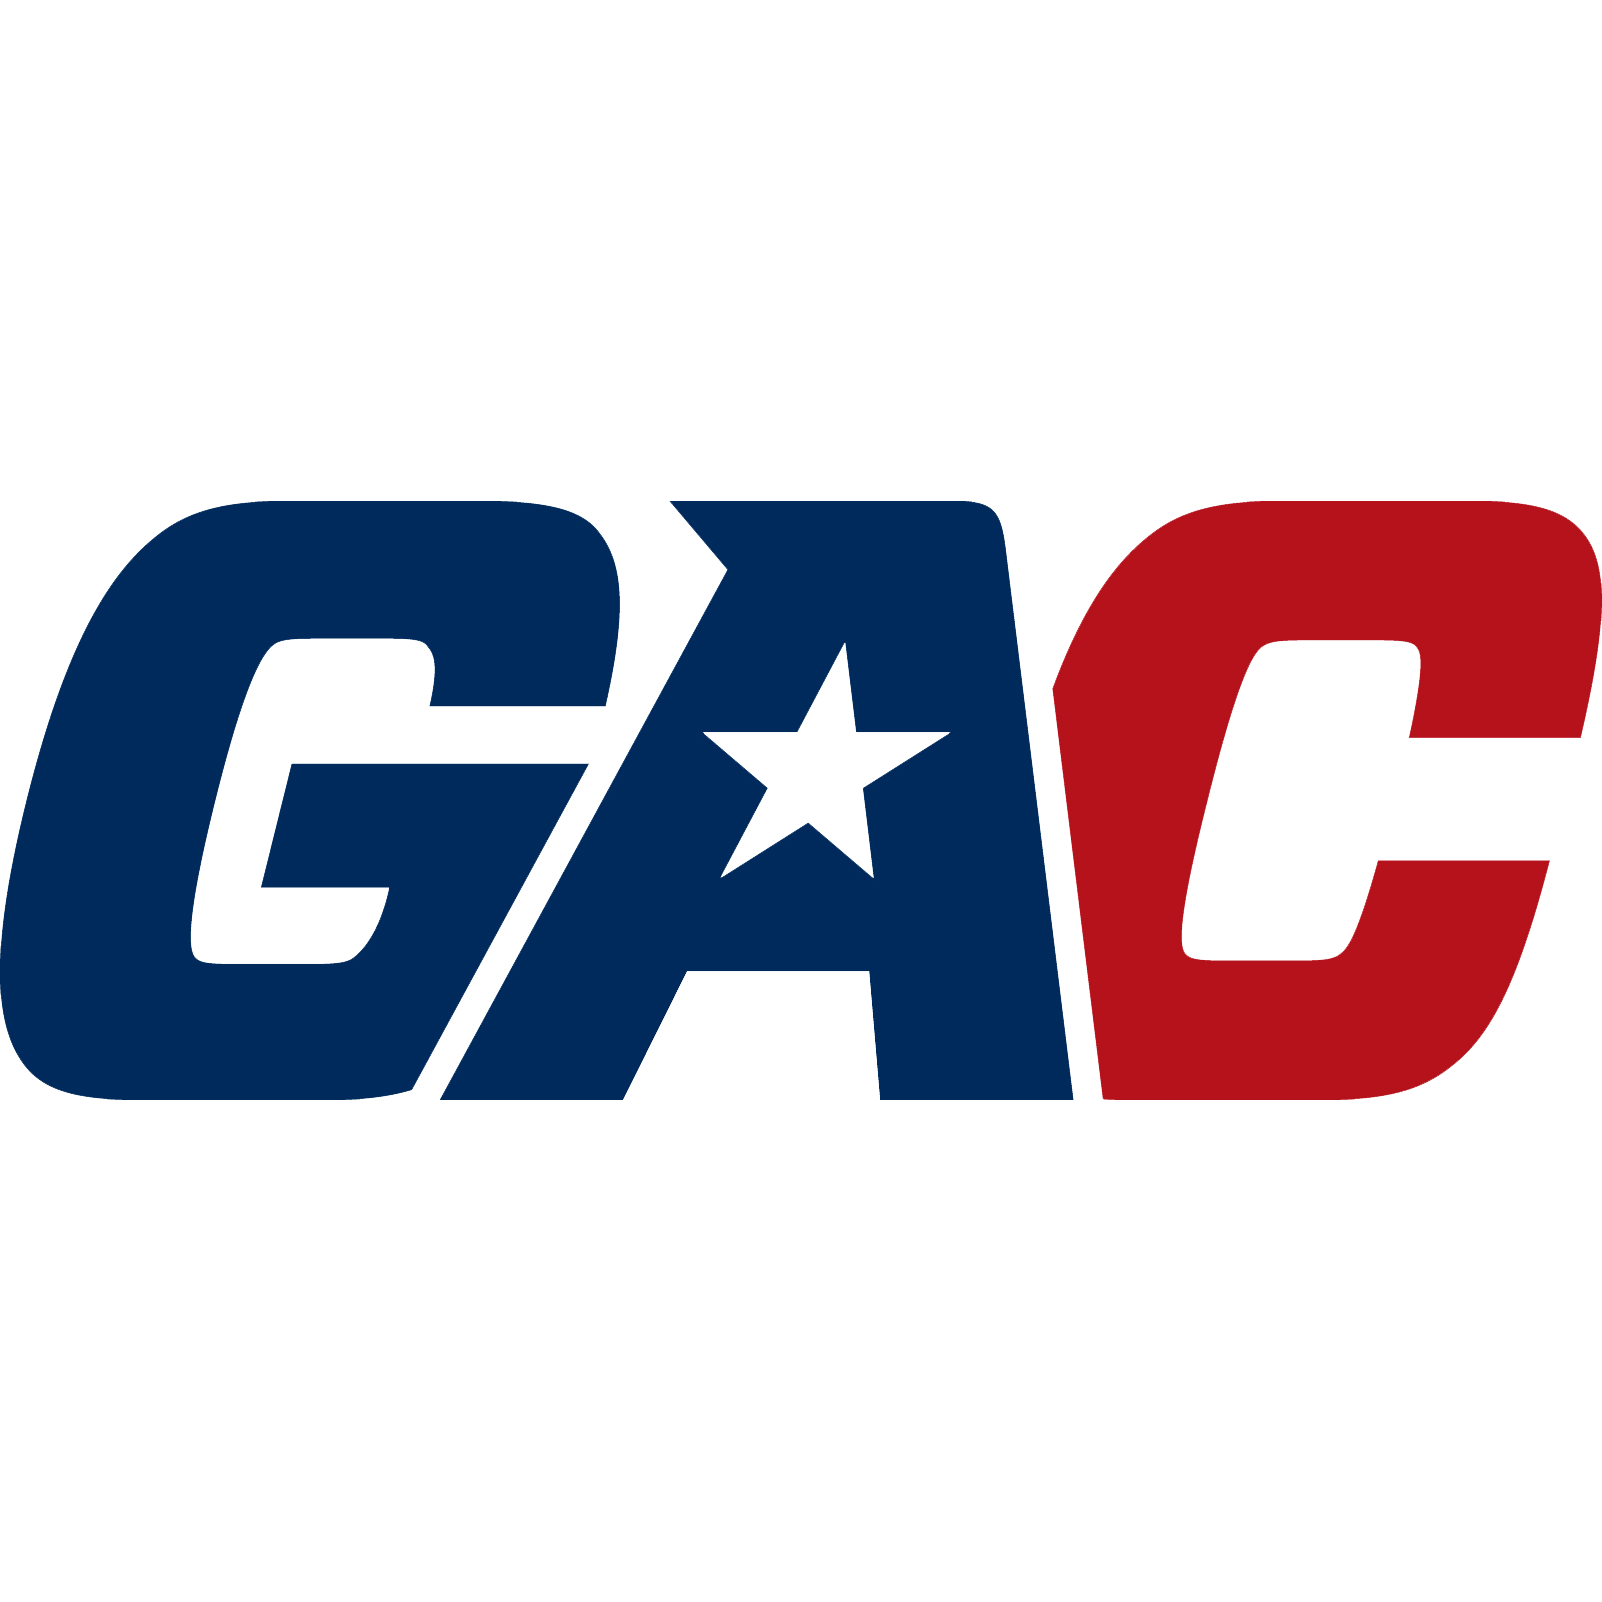 GAC Logo - D2 FOOTBALL PROFILE: Great American Conference - HERO Sports